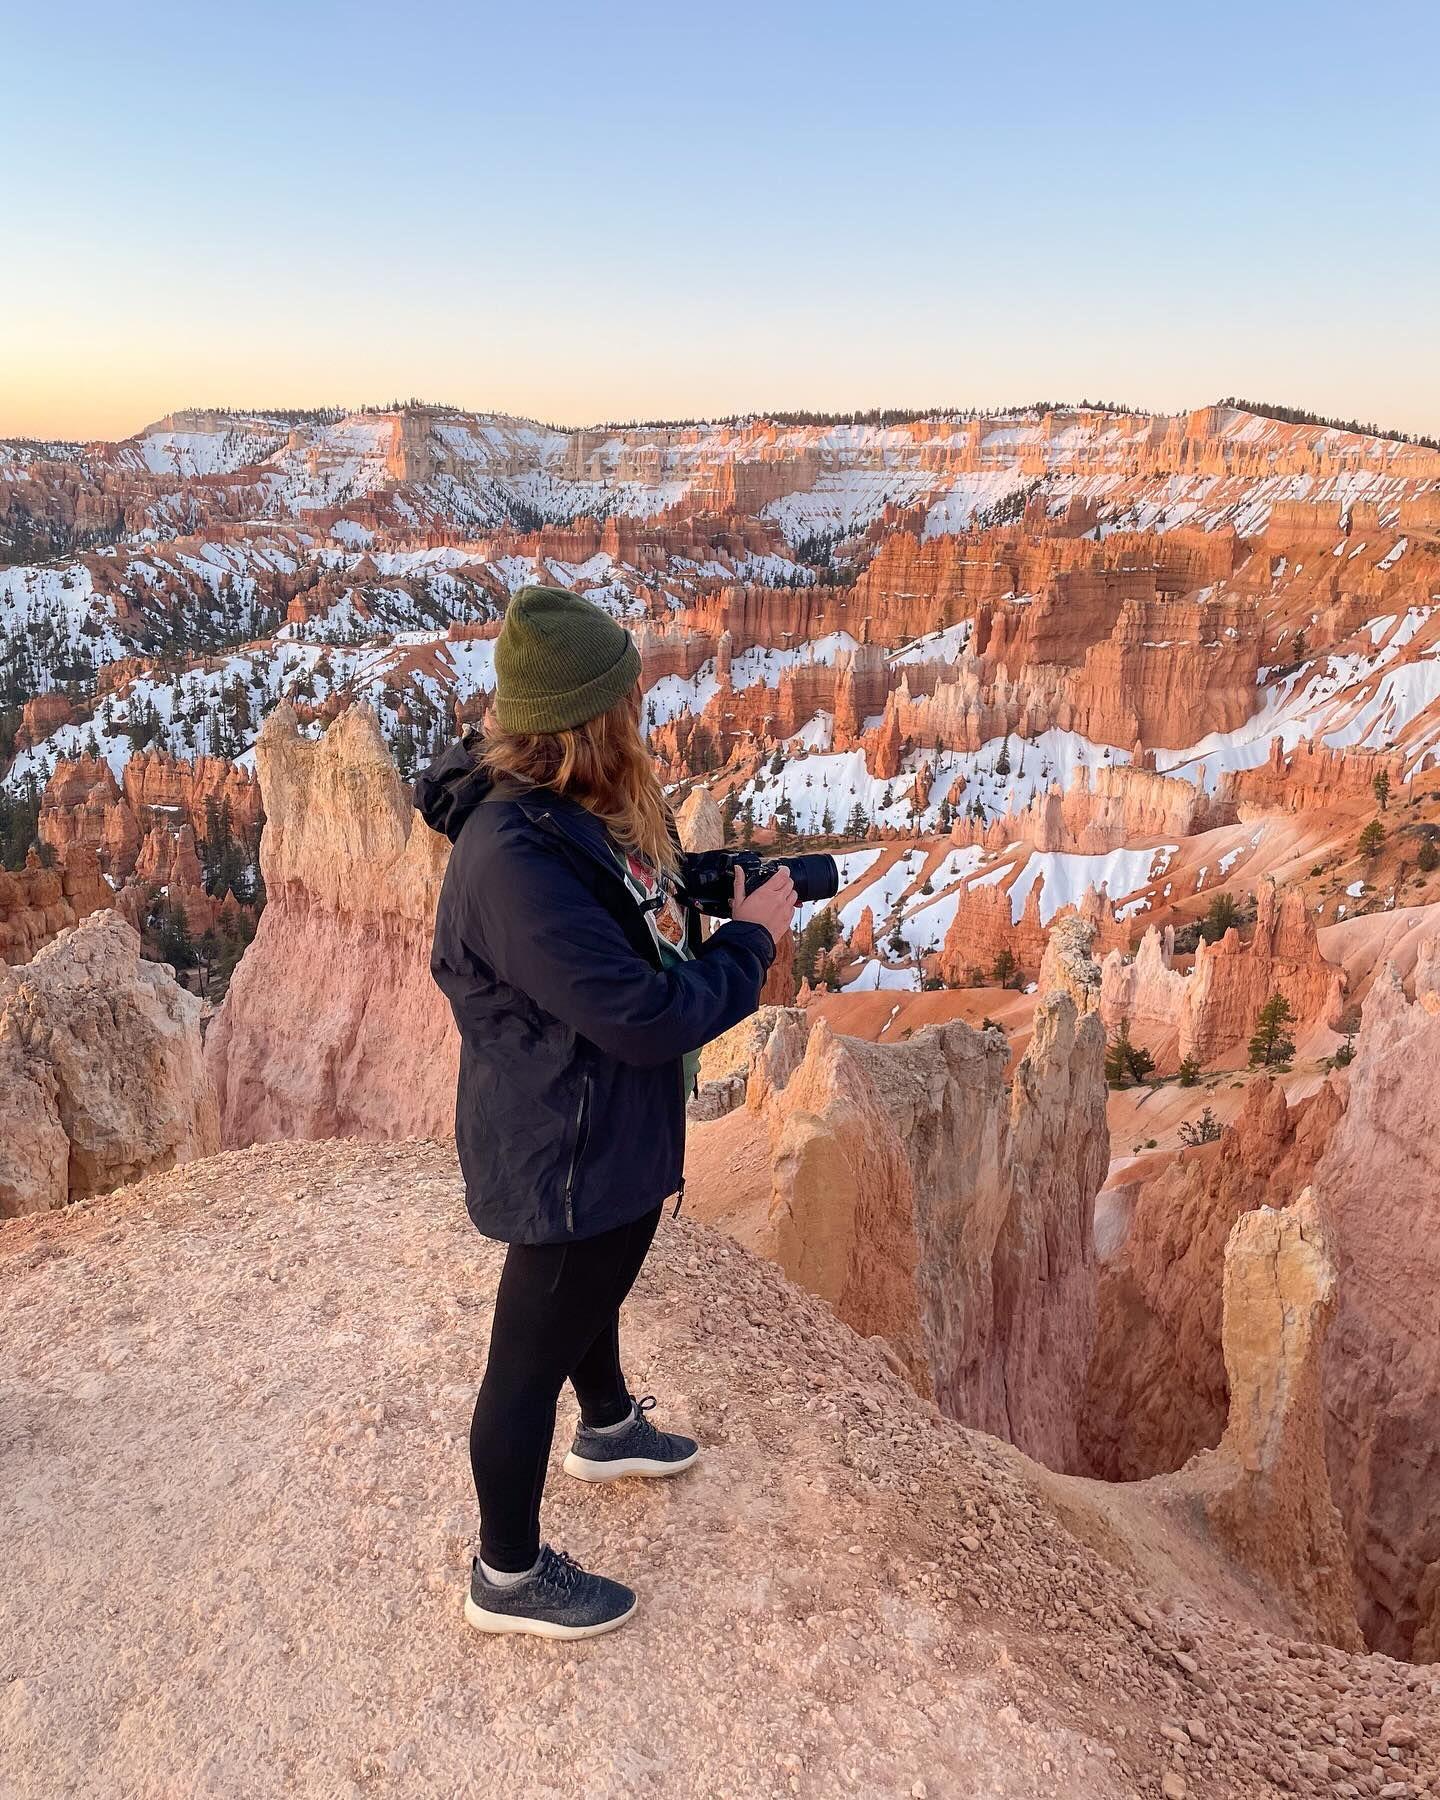 ✨Scenes from my most recent trip to Bryce Canyon! ✨